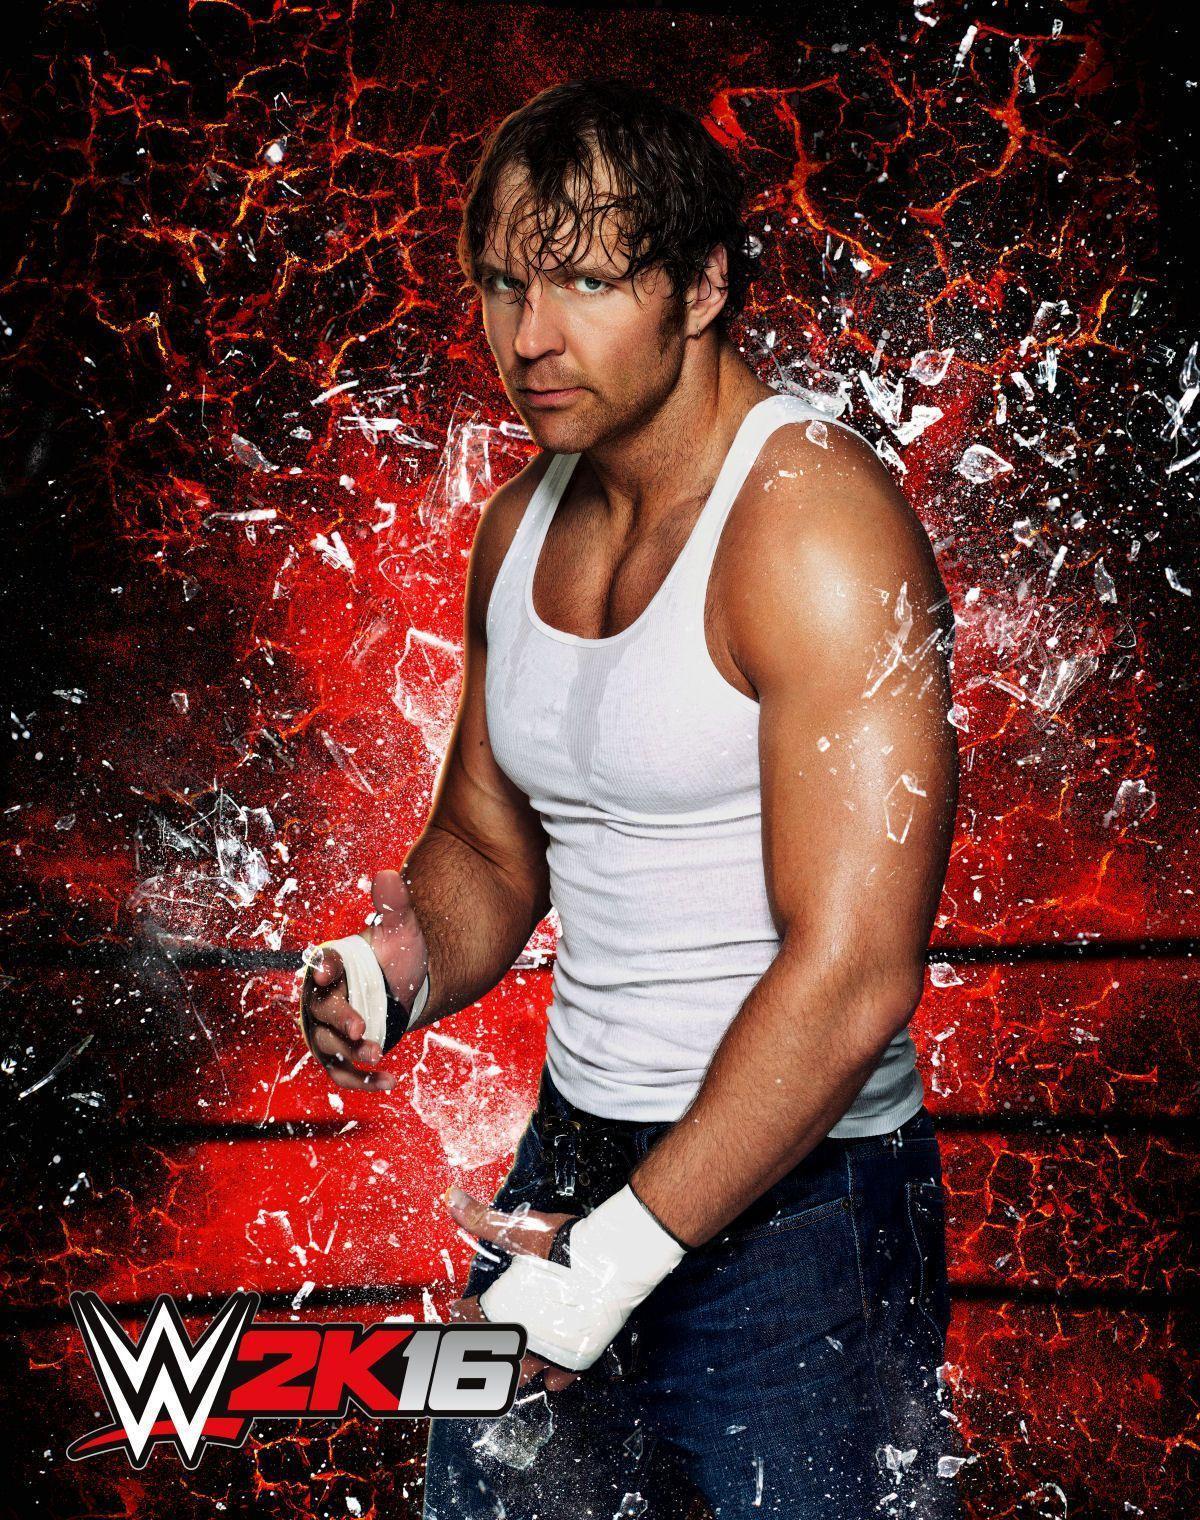 WWE 2K16 – Six superstars announced, check out the artwork